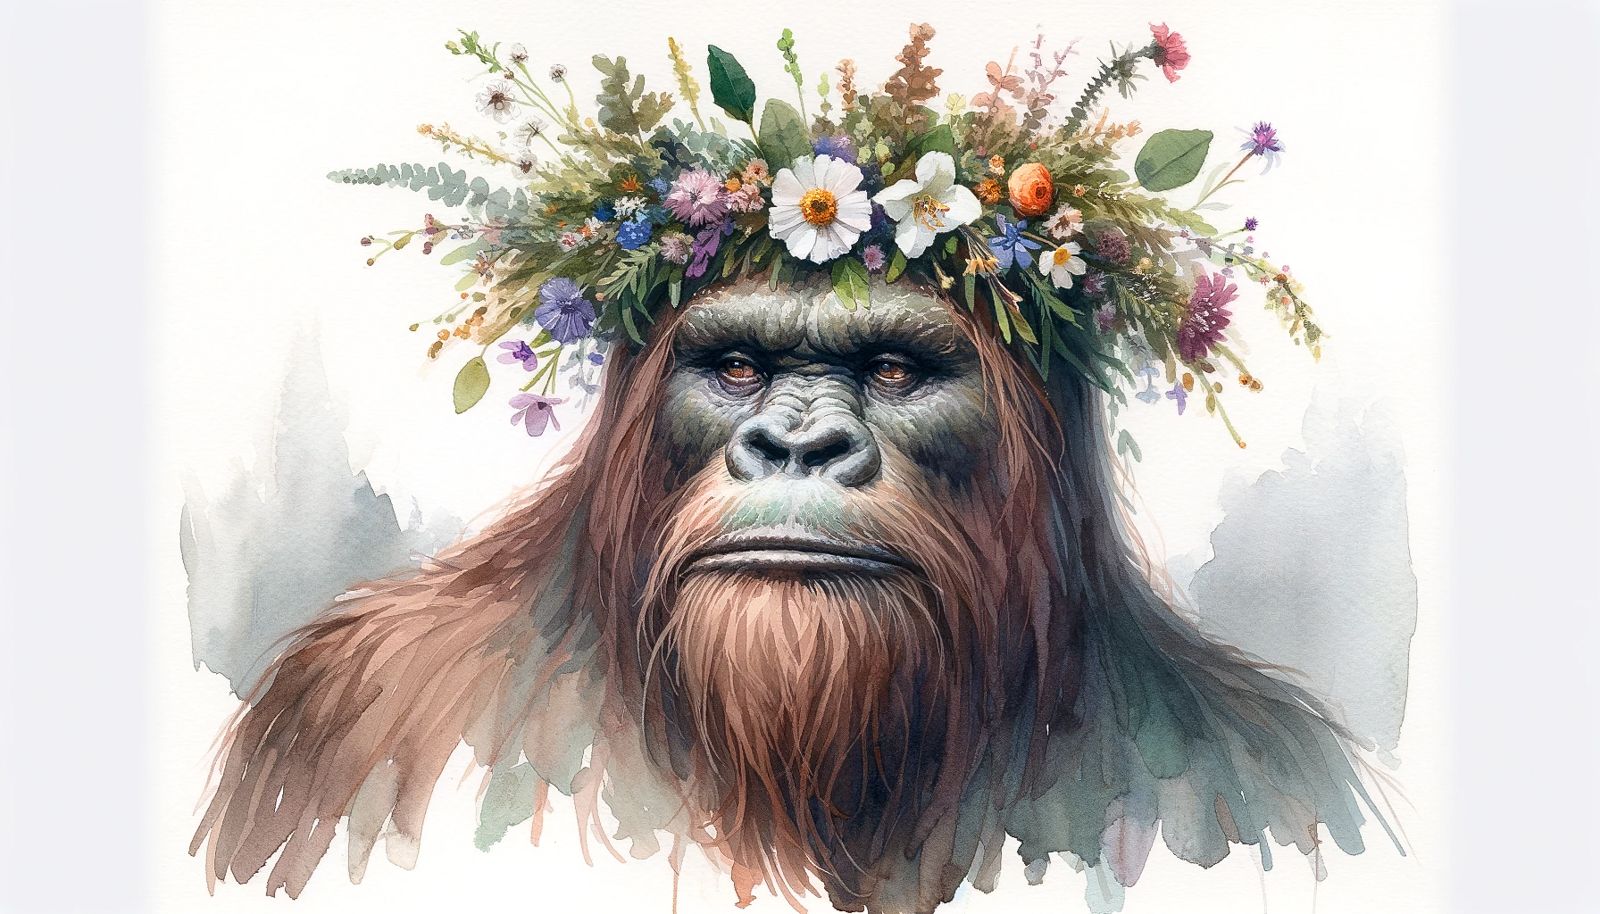 Watercolor image of a Sasquatch wearing a flower crown, generated by ChatGPT